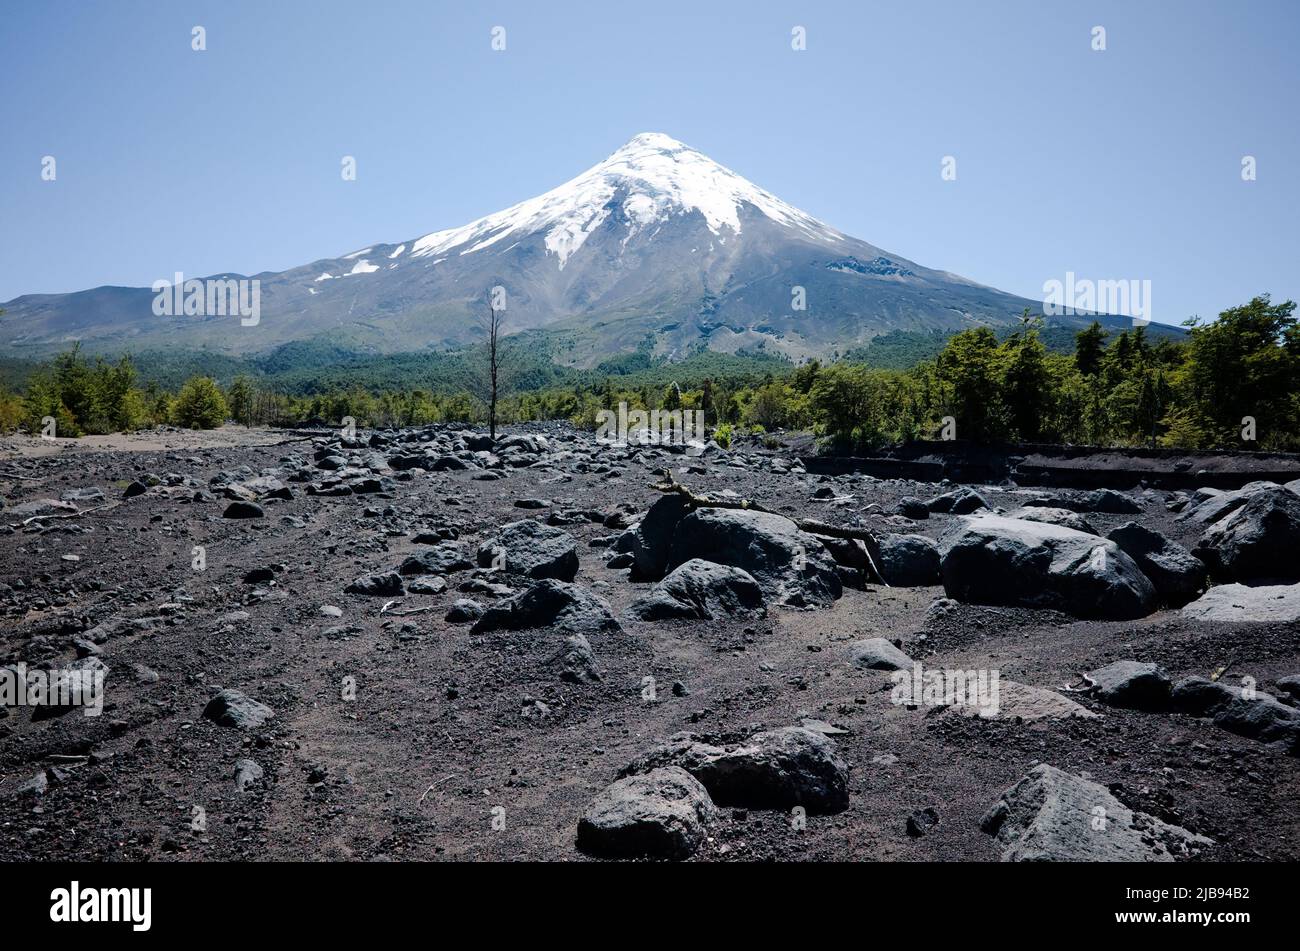 Volcanic landscape with black ground and green forest at foot of Osorno Volcano, Los Lagos province, Chile.  Volcano with a snow-capped peak Stock Photo